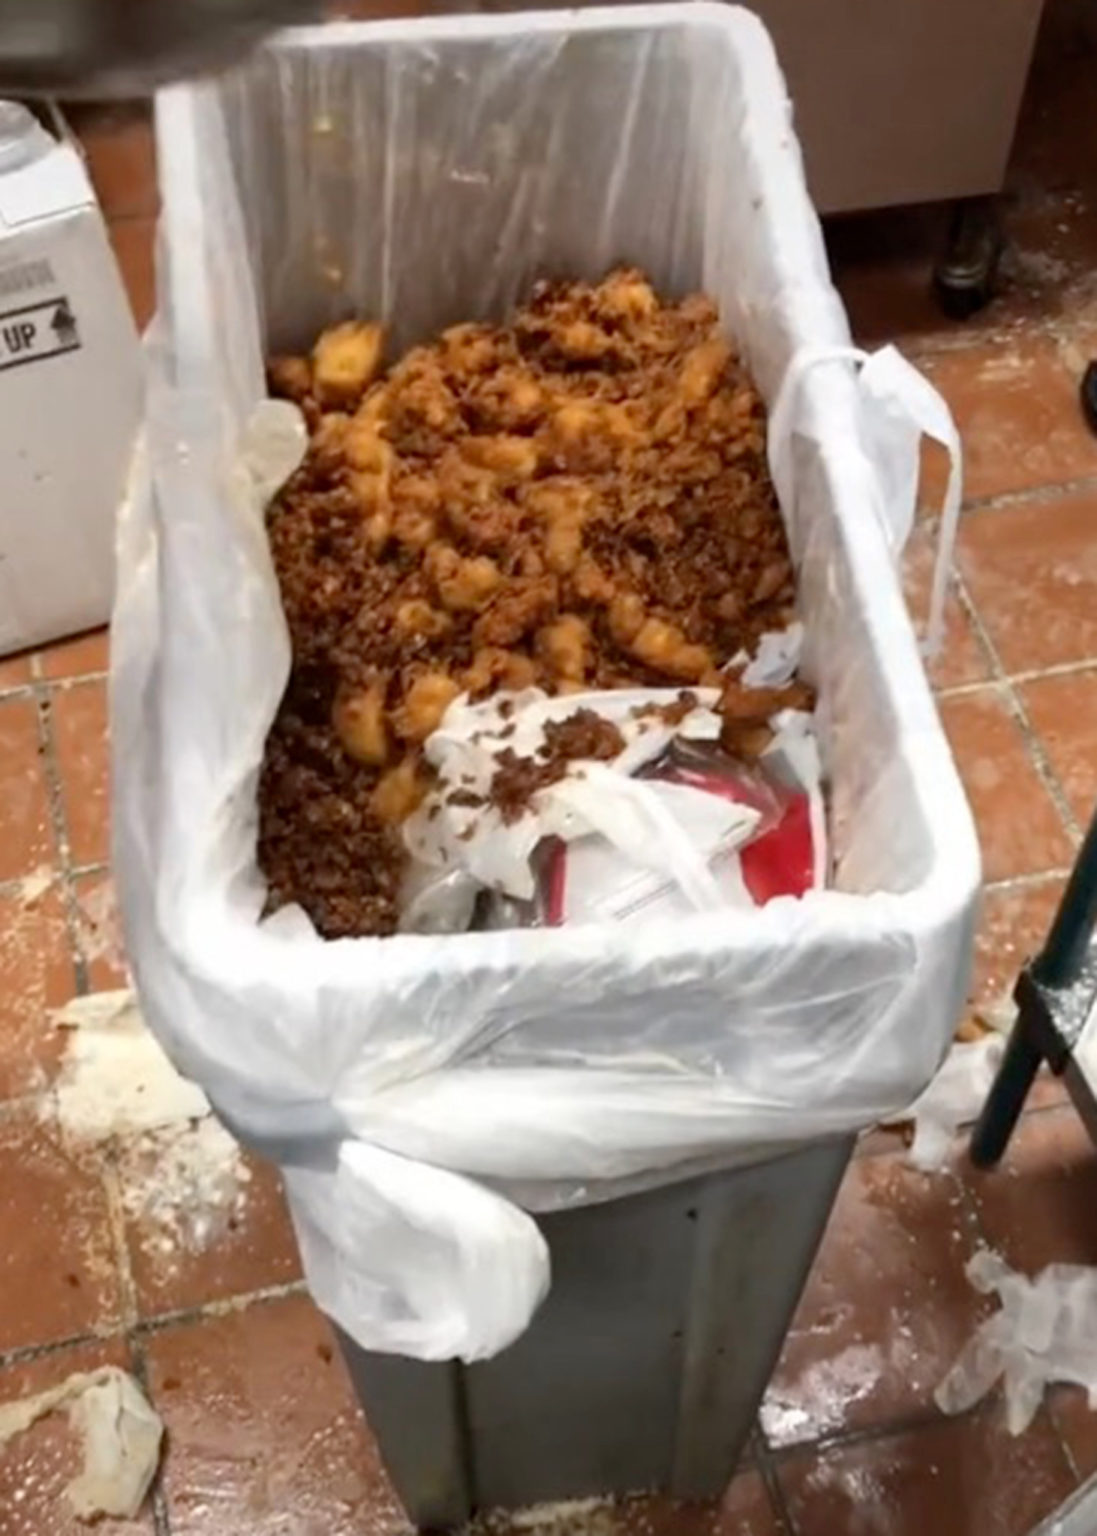 People Are Upset By Video Of Chick-fil-A Nuggets Being Trashed : The ...